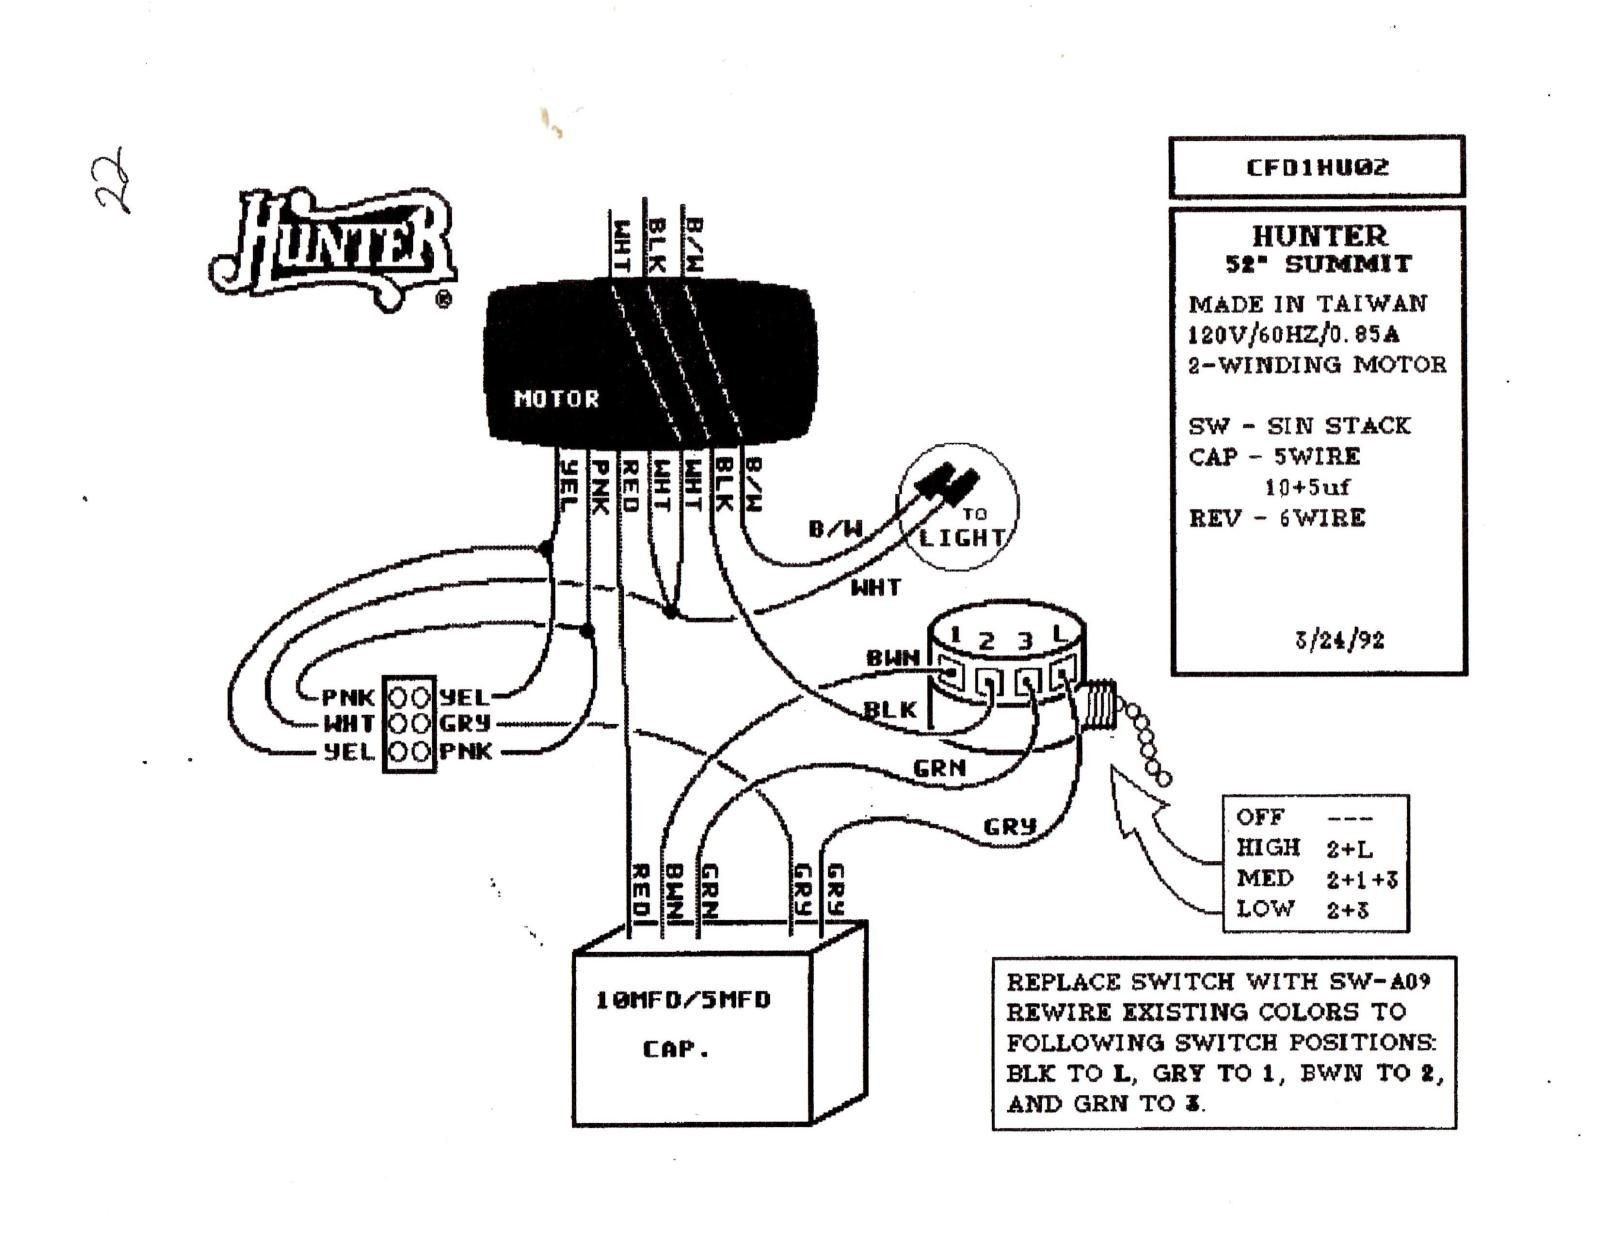 Wiring Diagram for A Ceiling Fan with Remote Control Best Hunter